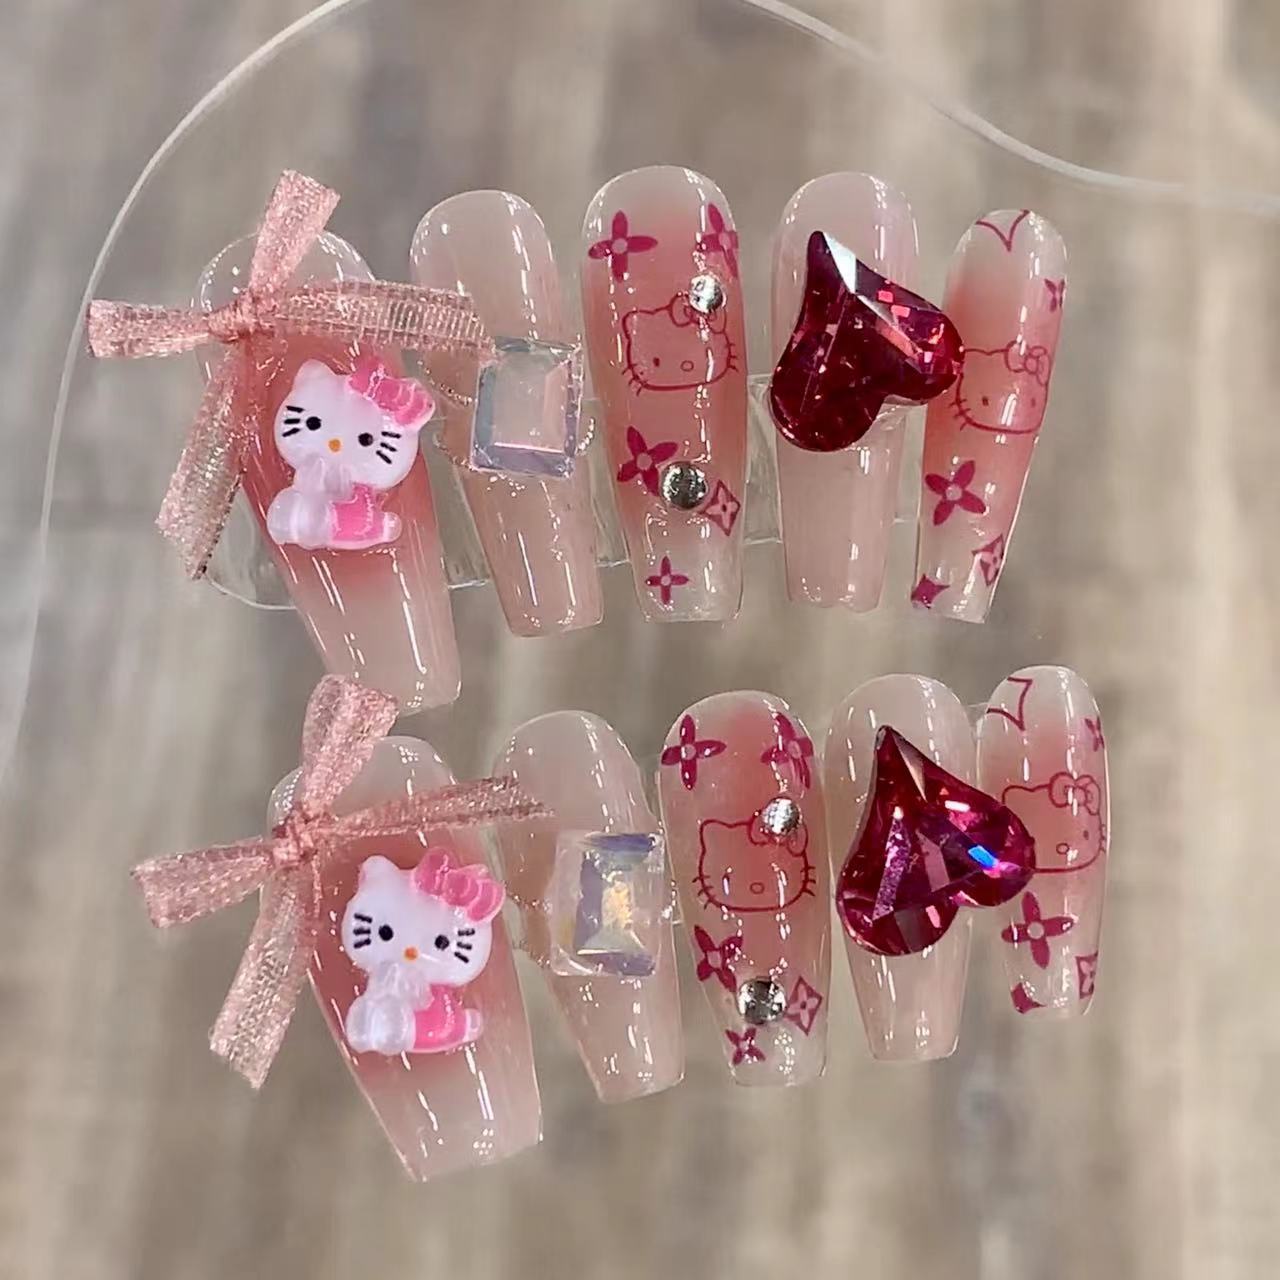 APPRENTICE CUPID-TEN PIECES OF HANDCRAFTED PRESS ON NAIL